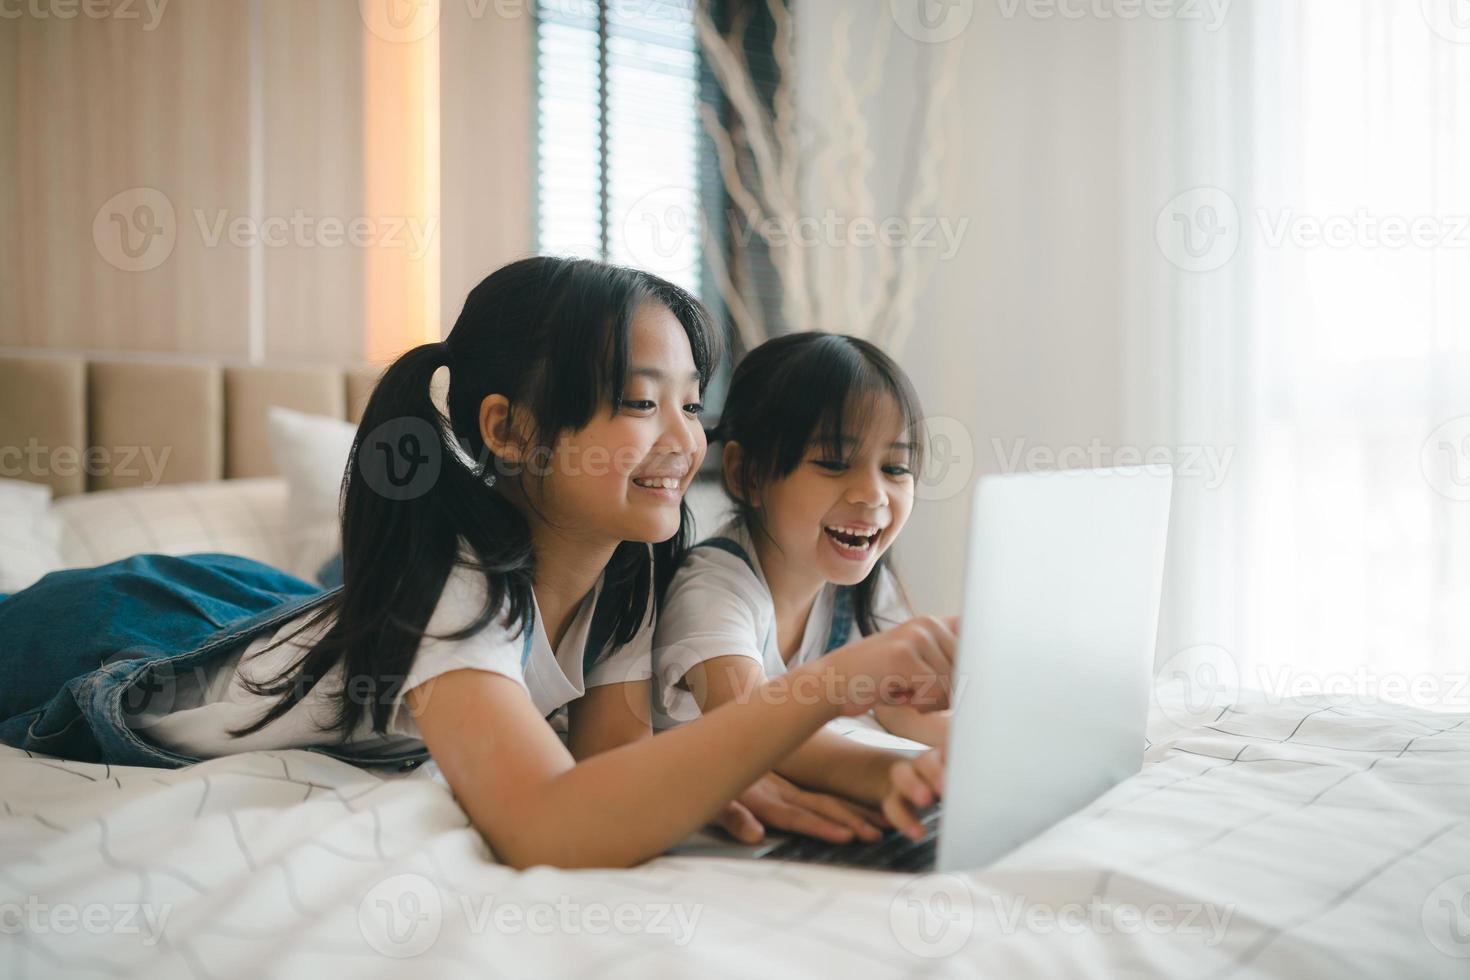 Sibling Asian girl child on the bed and learning online on a laptop Internet. Virtual class lesson on video during self isolation at home. Distant remote video education. Modern school study for kids photo